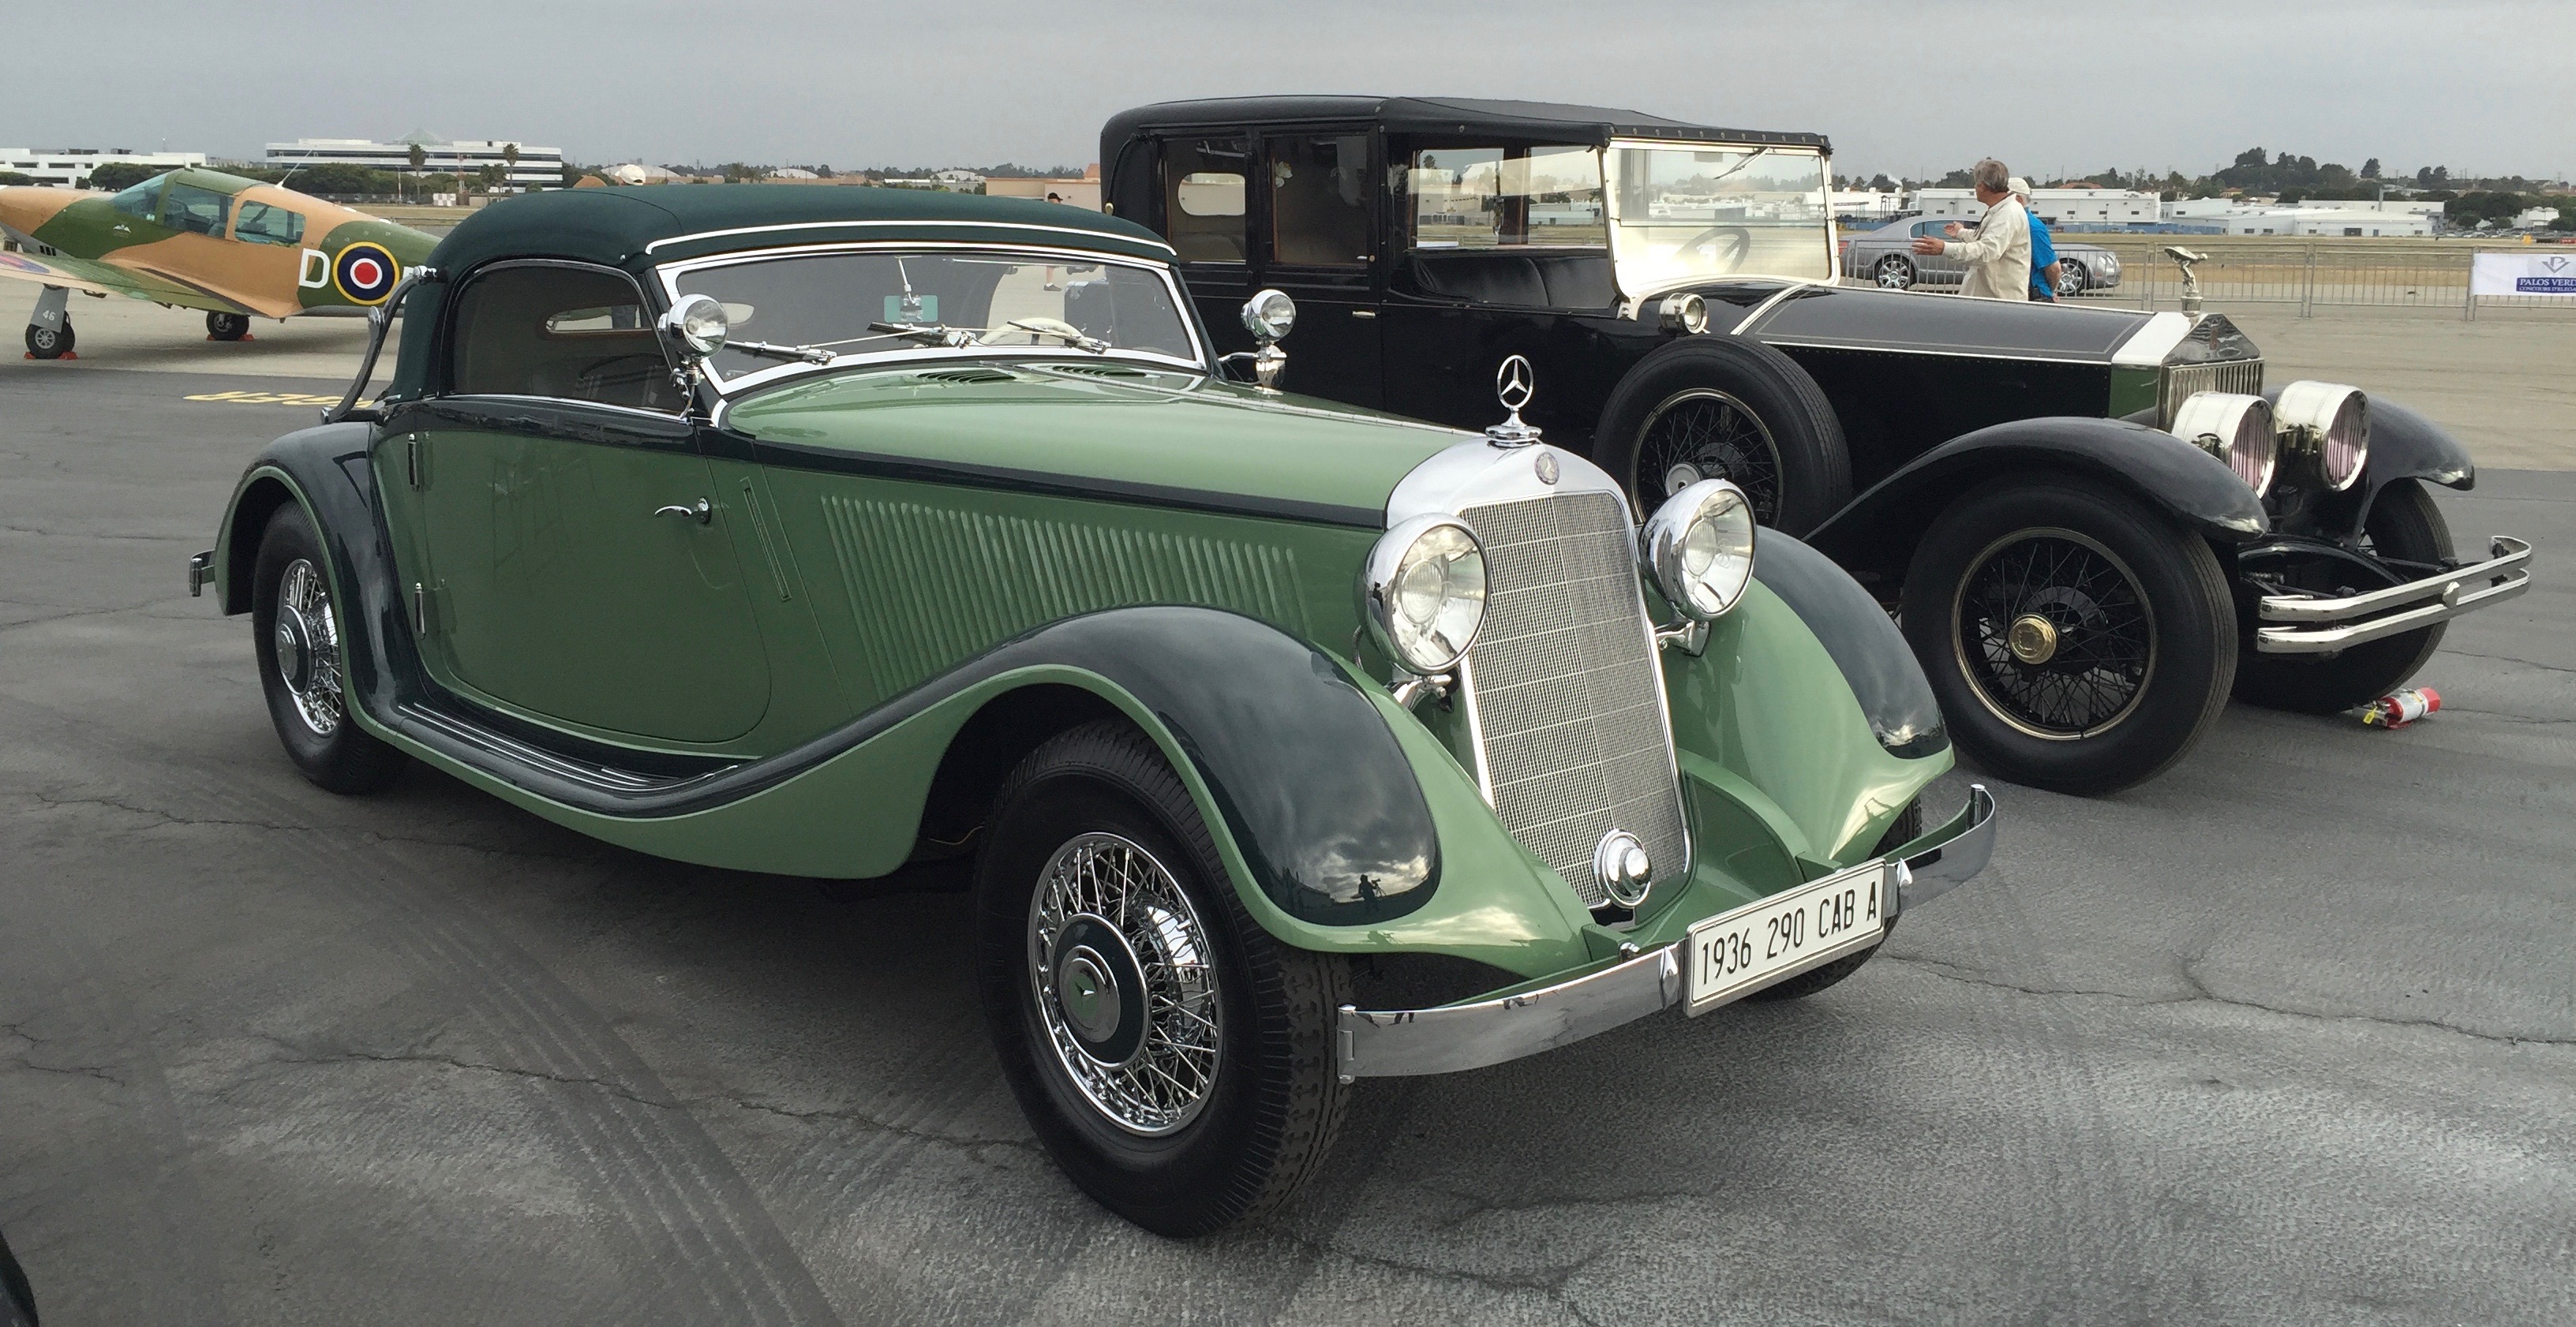 , Palos Verdes concours flies to new heights at airport location, ClassicCars.com Journal